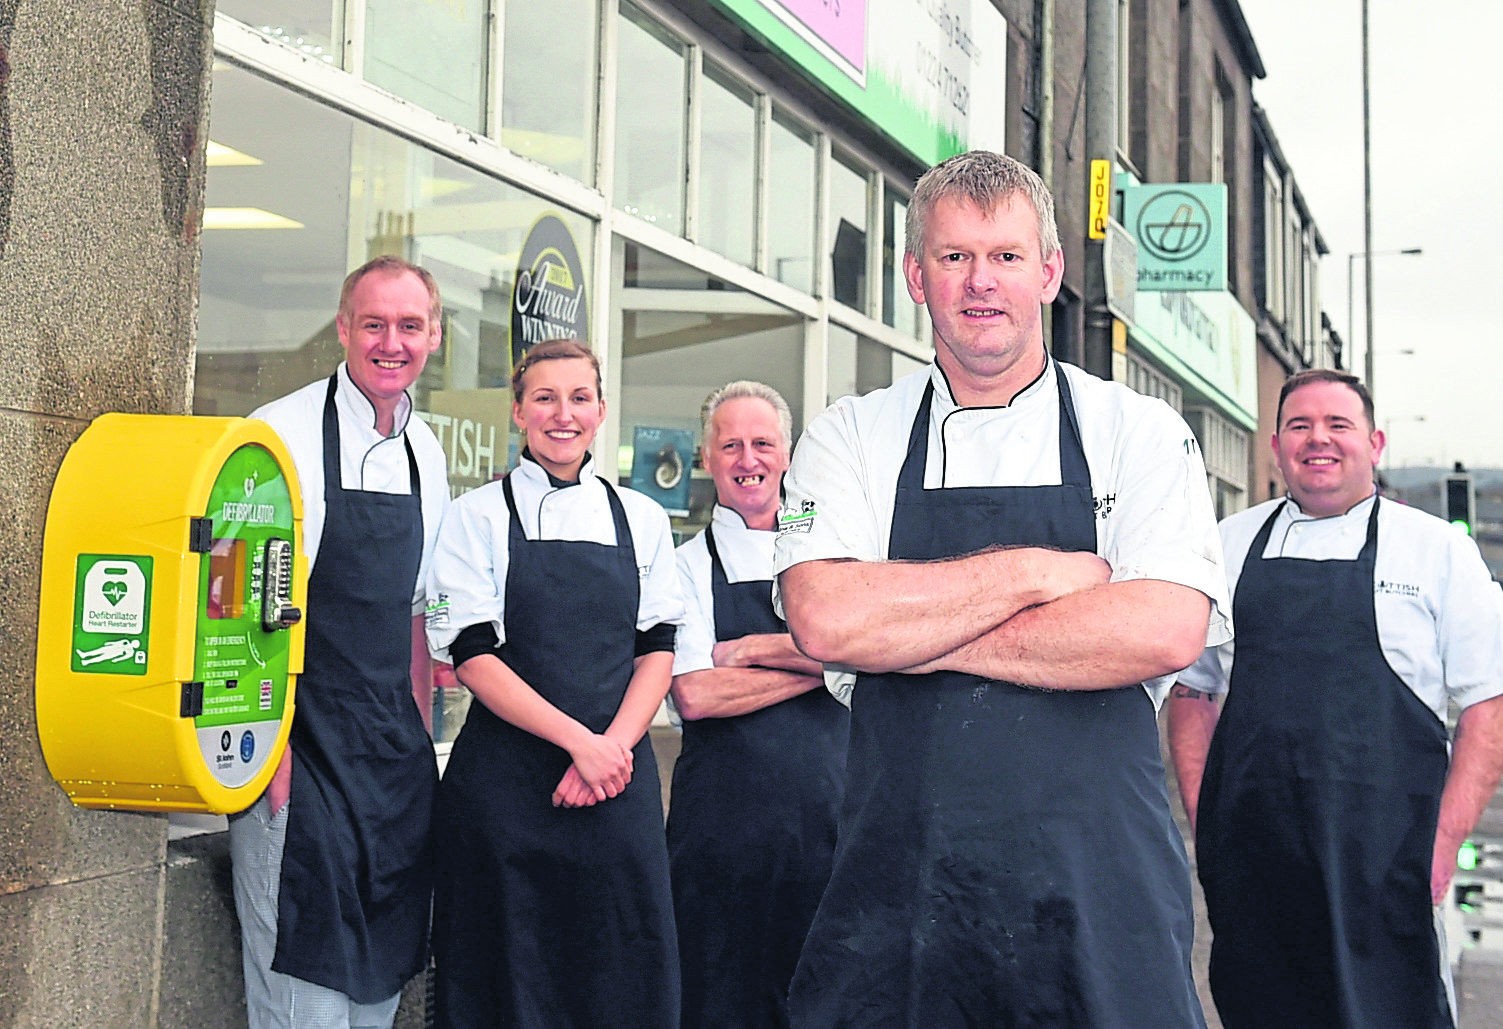 Kenny Milne, front, with his team from H&S Milne and the wall-mounted defibrillator.